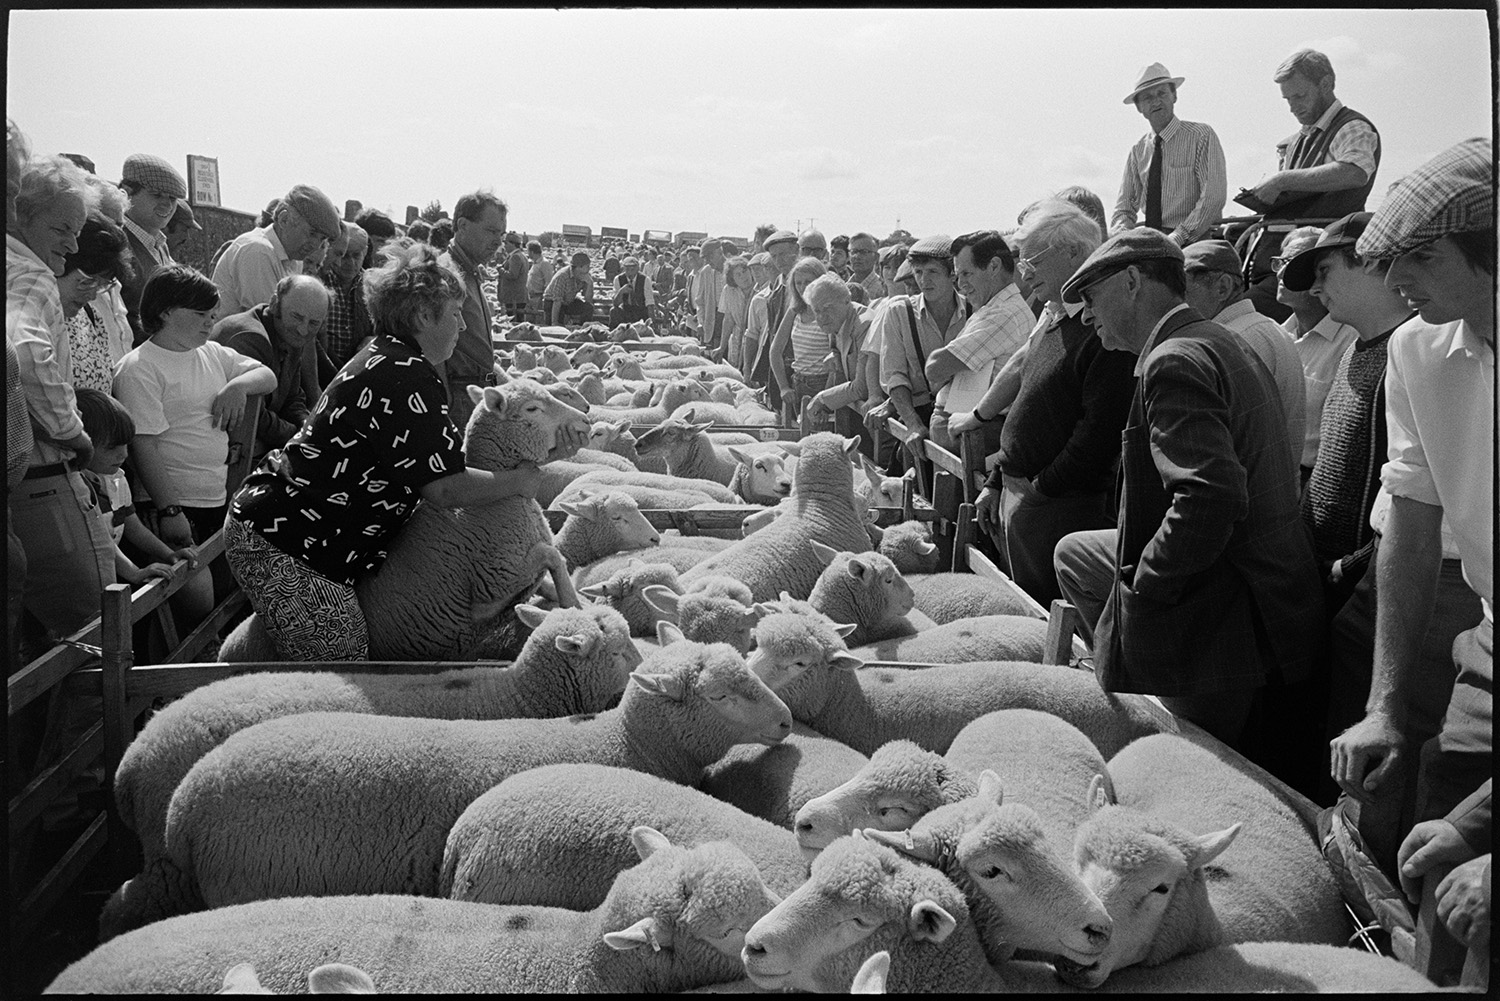 Sheep fair, farmers, auctioneers moving along pens of sheep on hot day. 
[A woman holding and checking a sheep in a pen at South Molton Sheep Fair. Men, women and children are watching and an auctioneer and his clerk are looking over the crowd.]